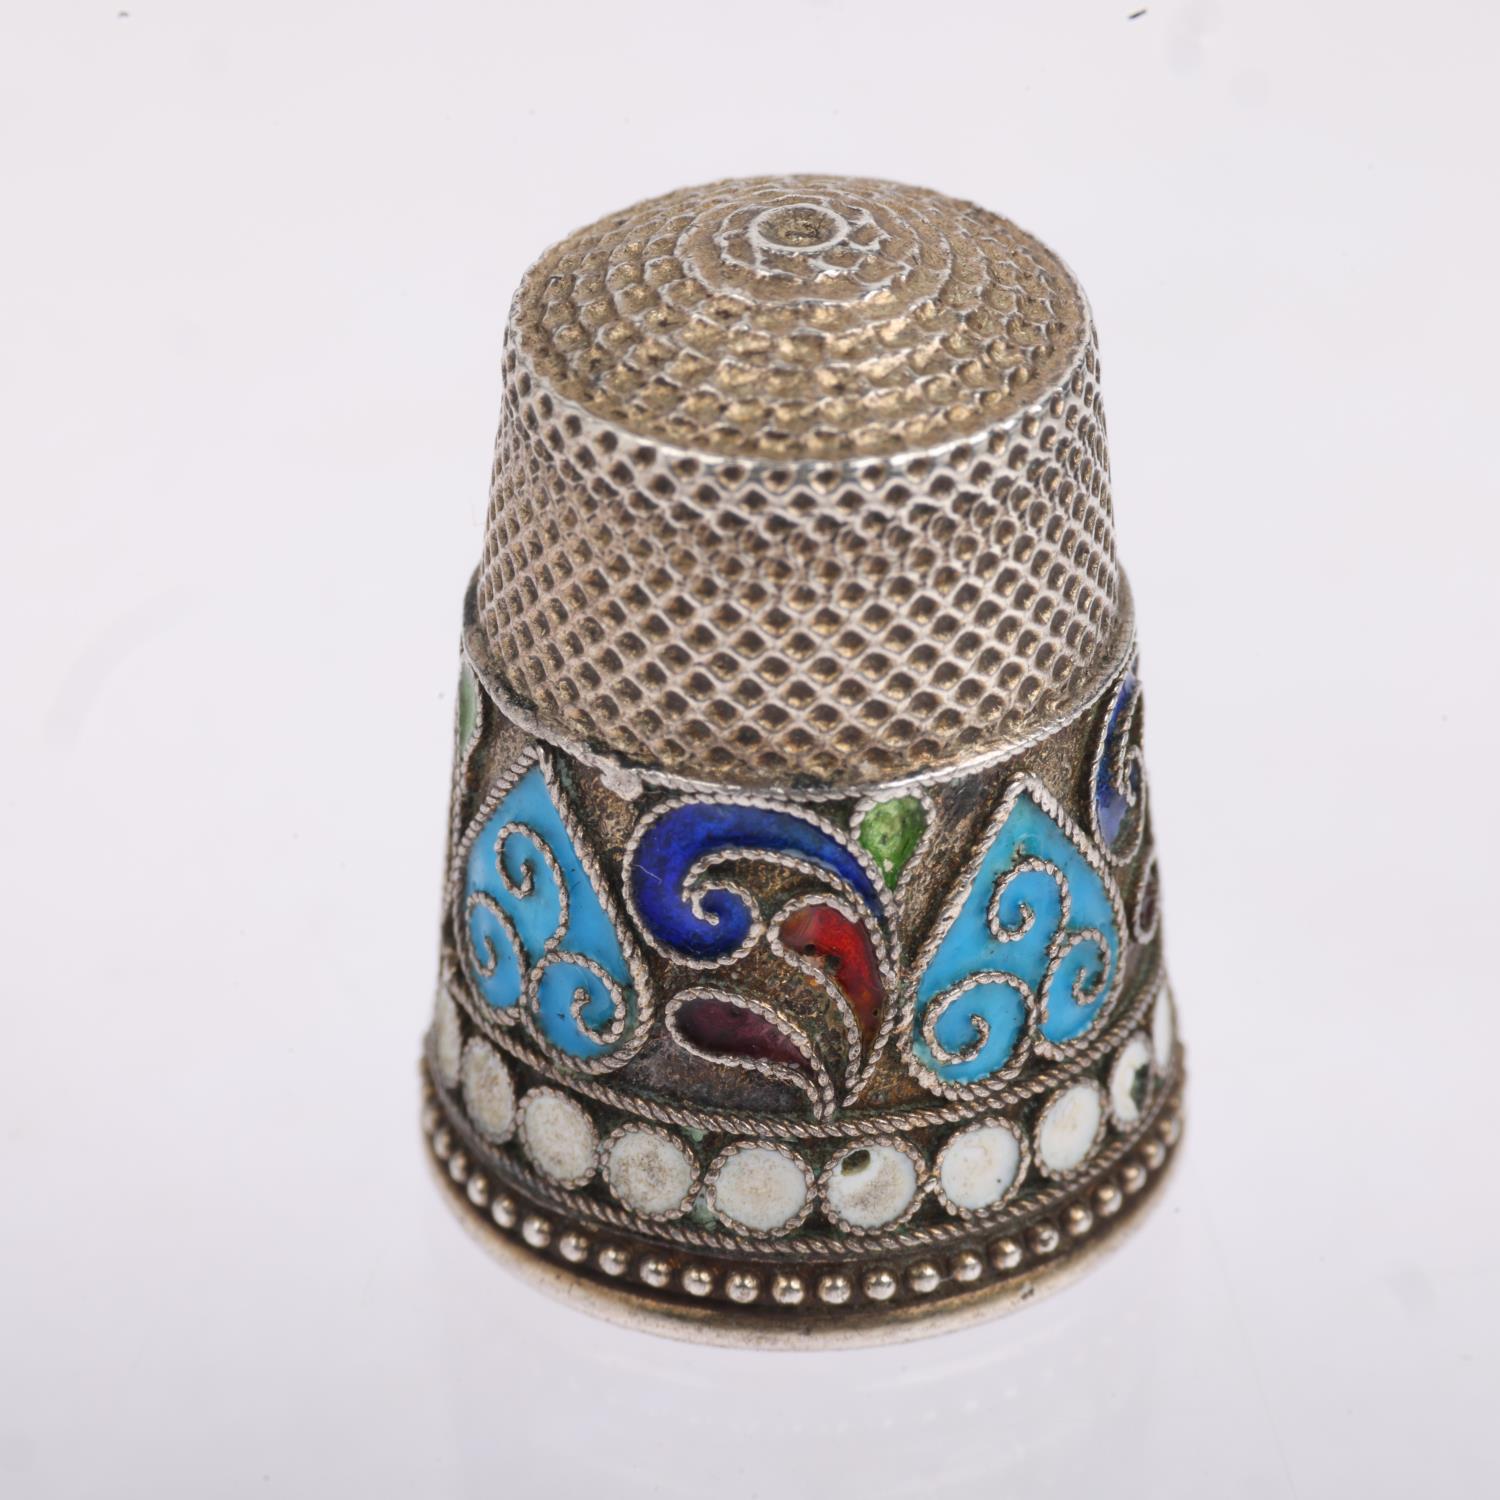 A Russian 84 zolotnik standard silver and champleve enamel thimble, 22.7mm, 6.3g 1 small hole at top - Image 2 of 4